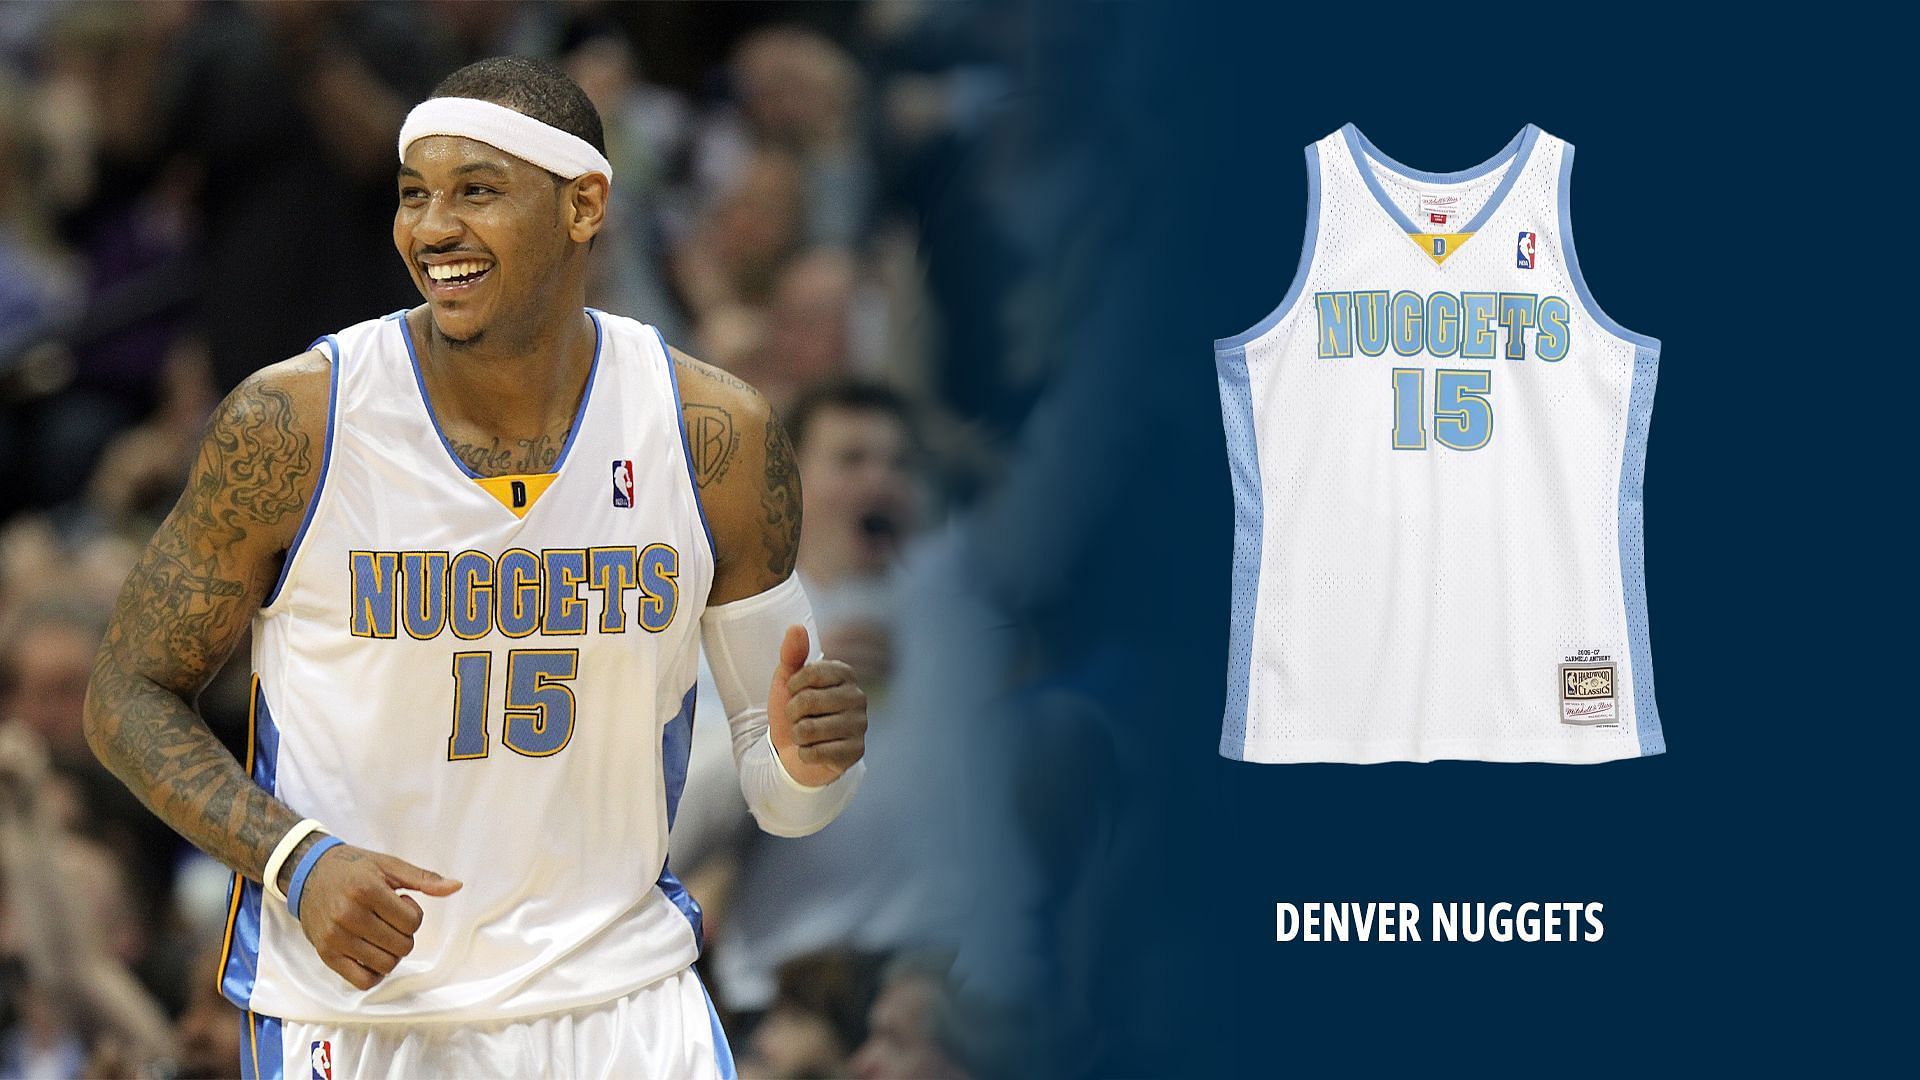 The Nuggets had an amazing design of jerseys